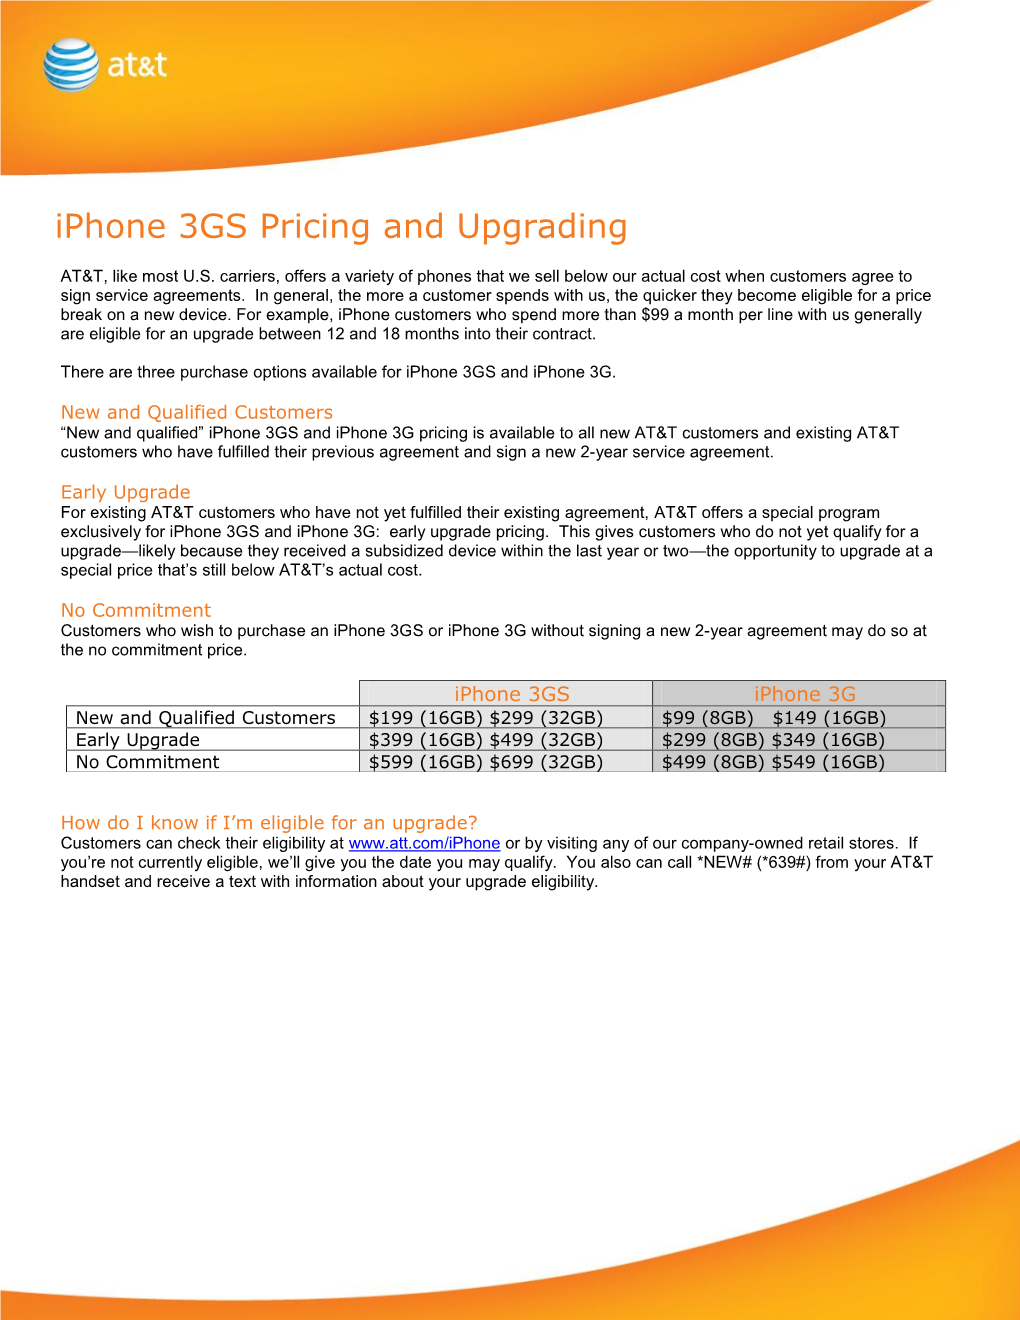 Iphone 3GS Pricing and Upgrading